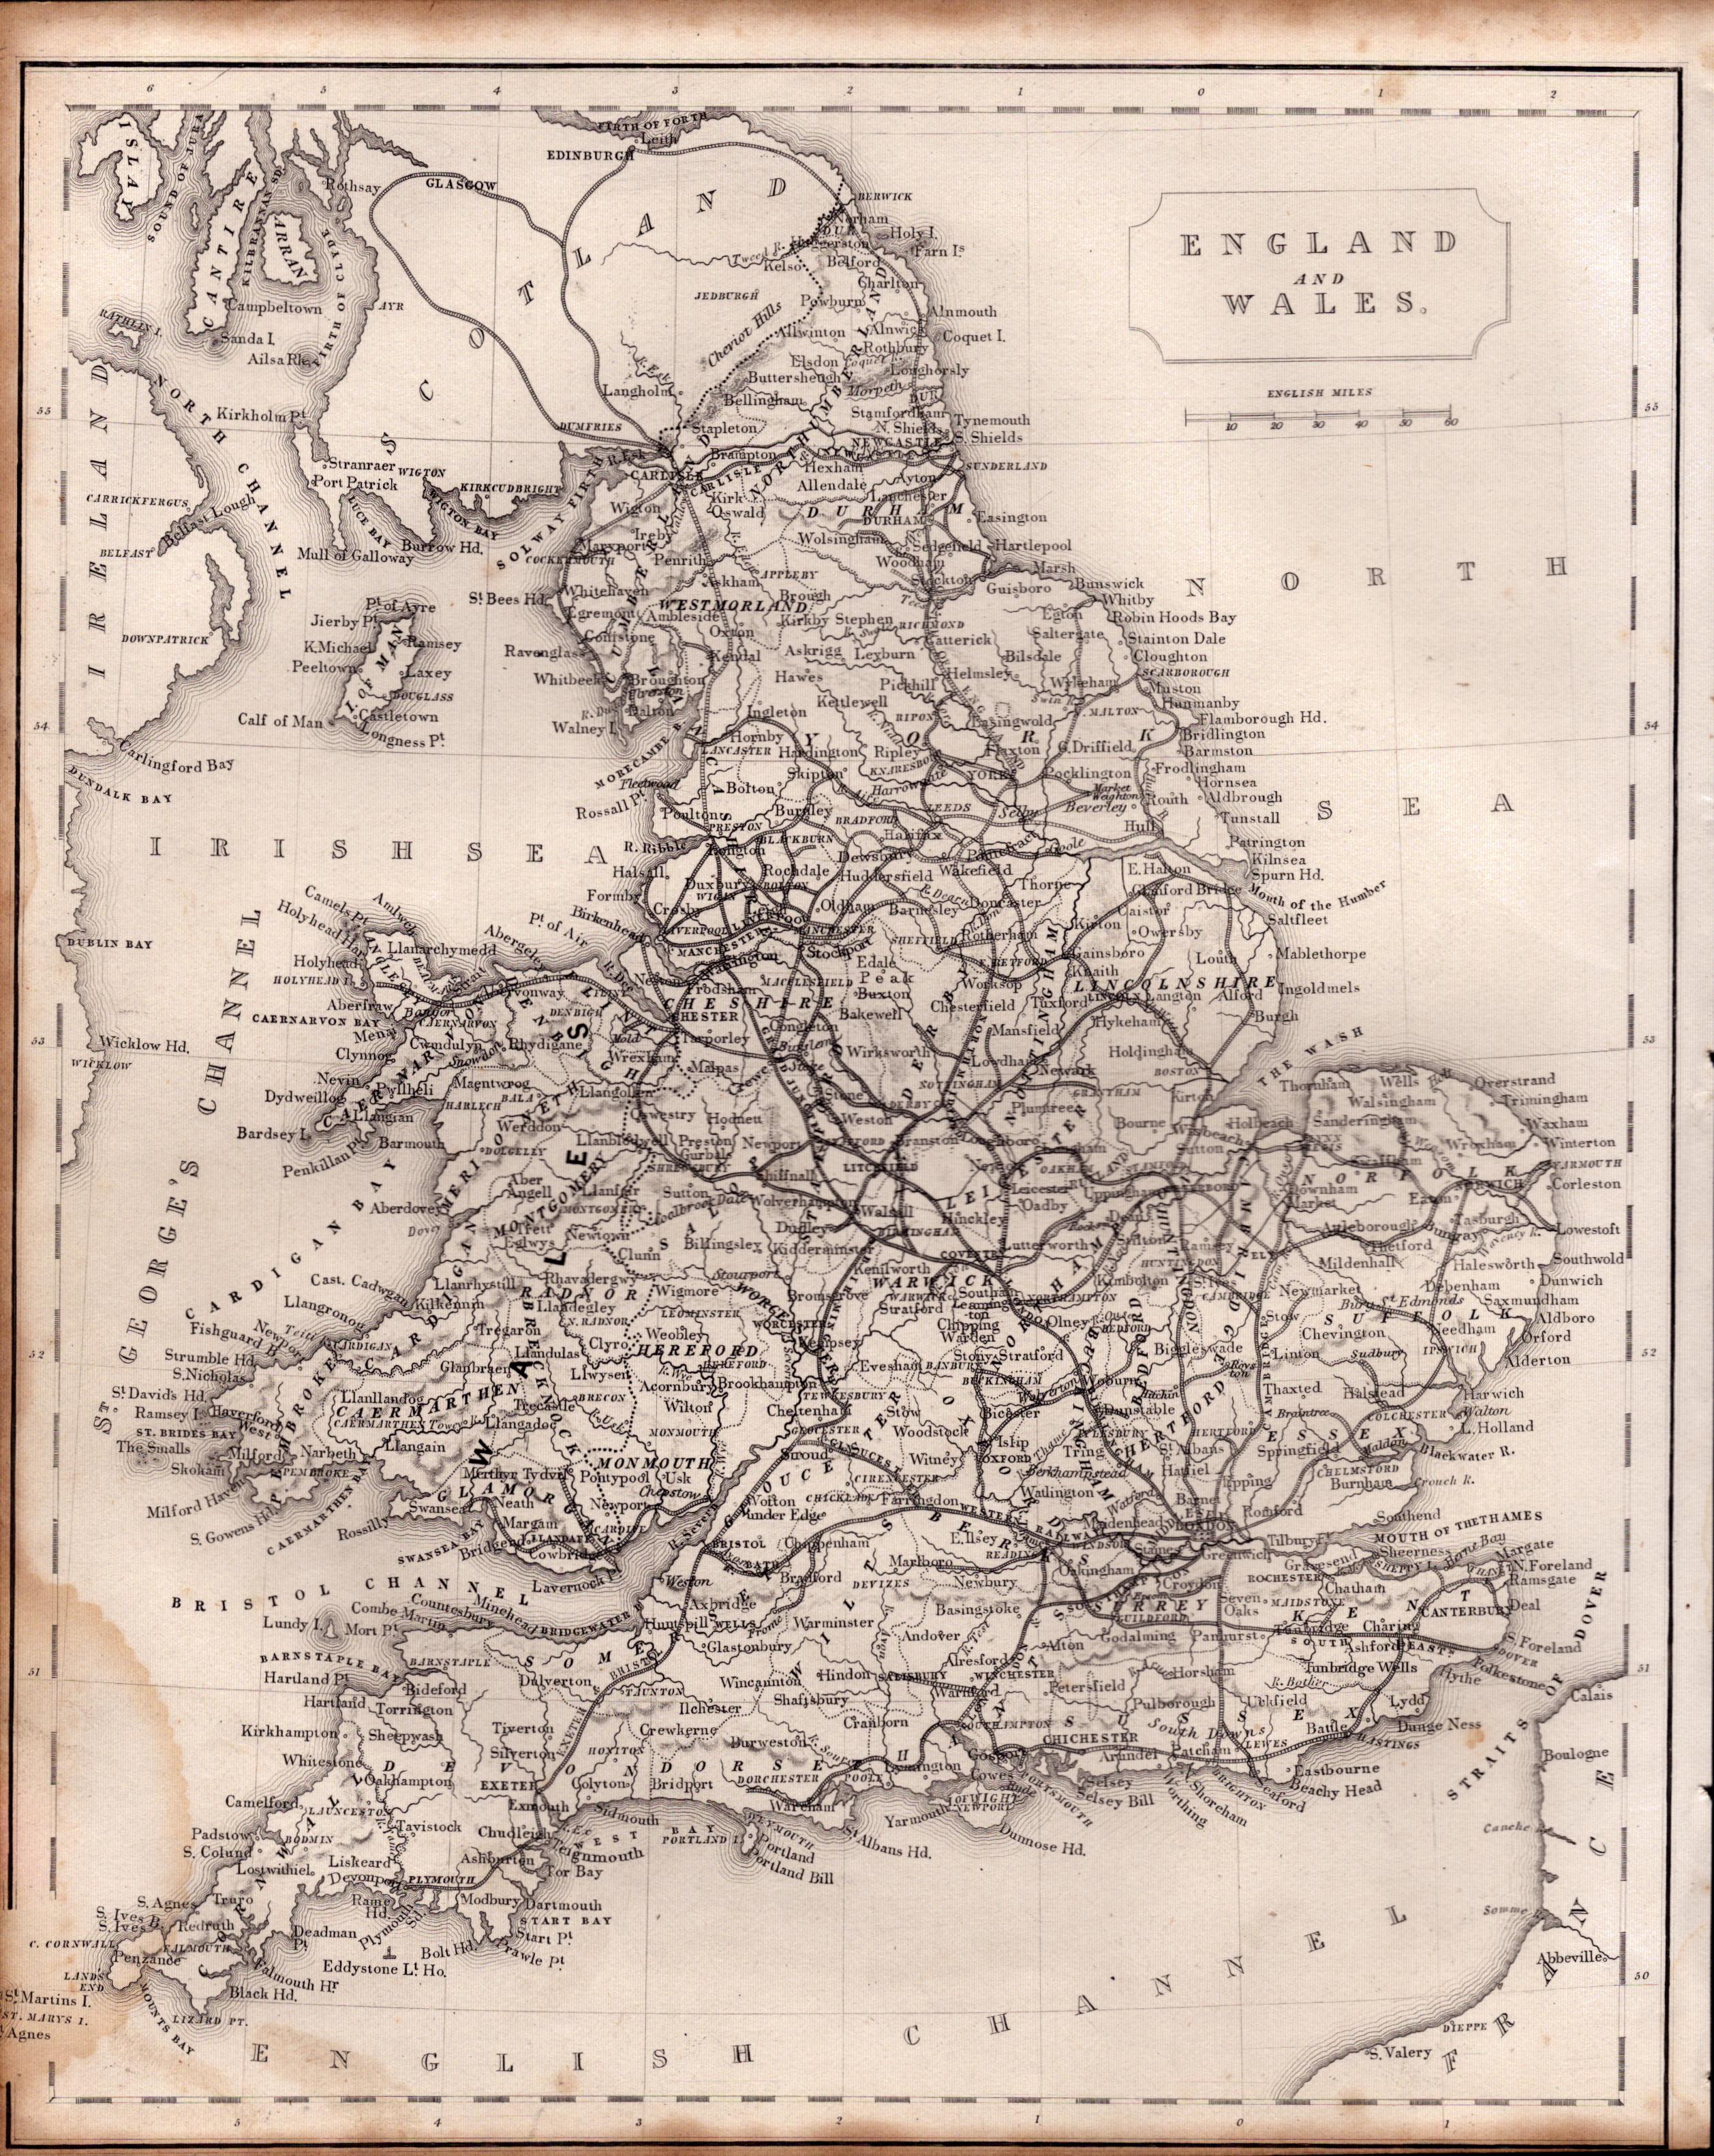 England & Wales Steel Engraved Victorian Thomas Moule Antique Map.